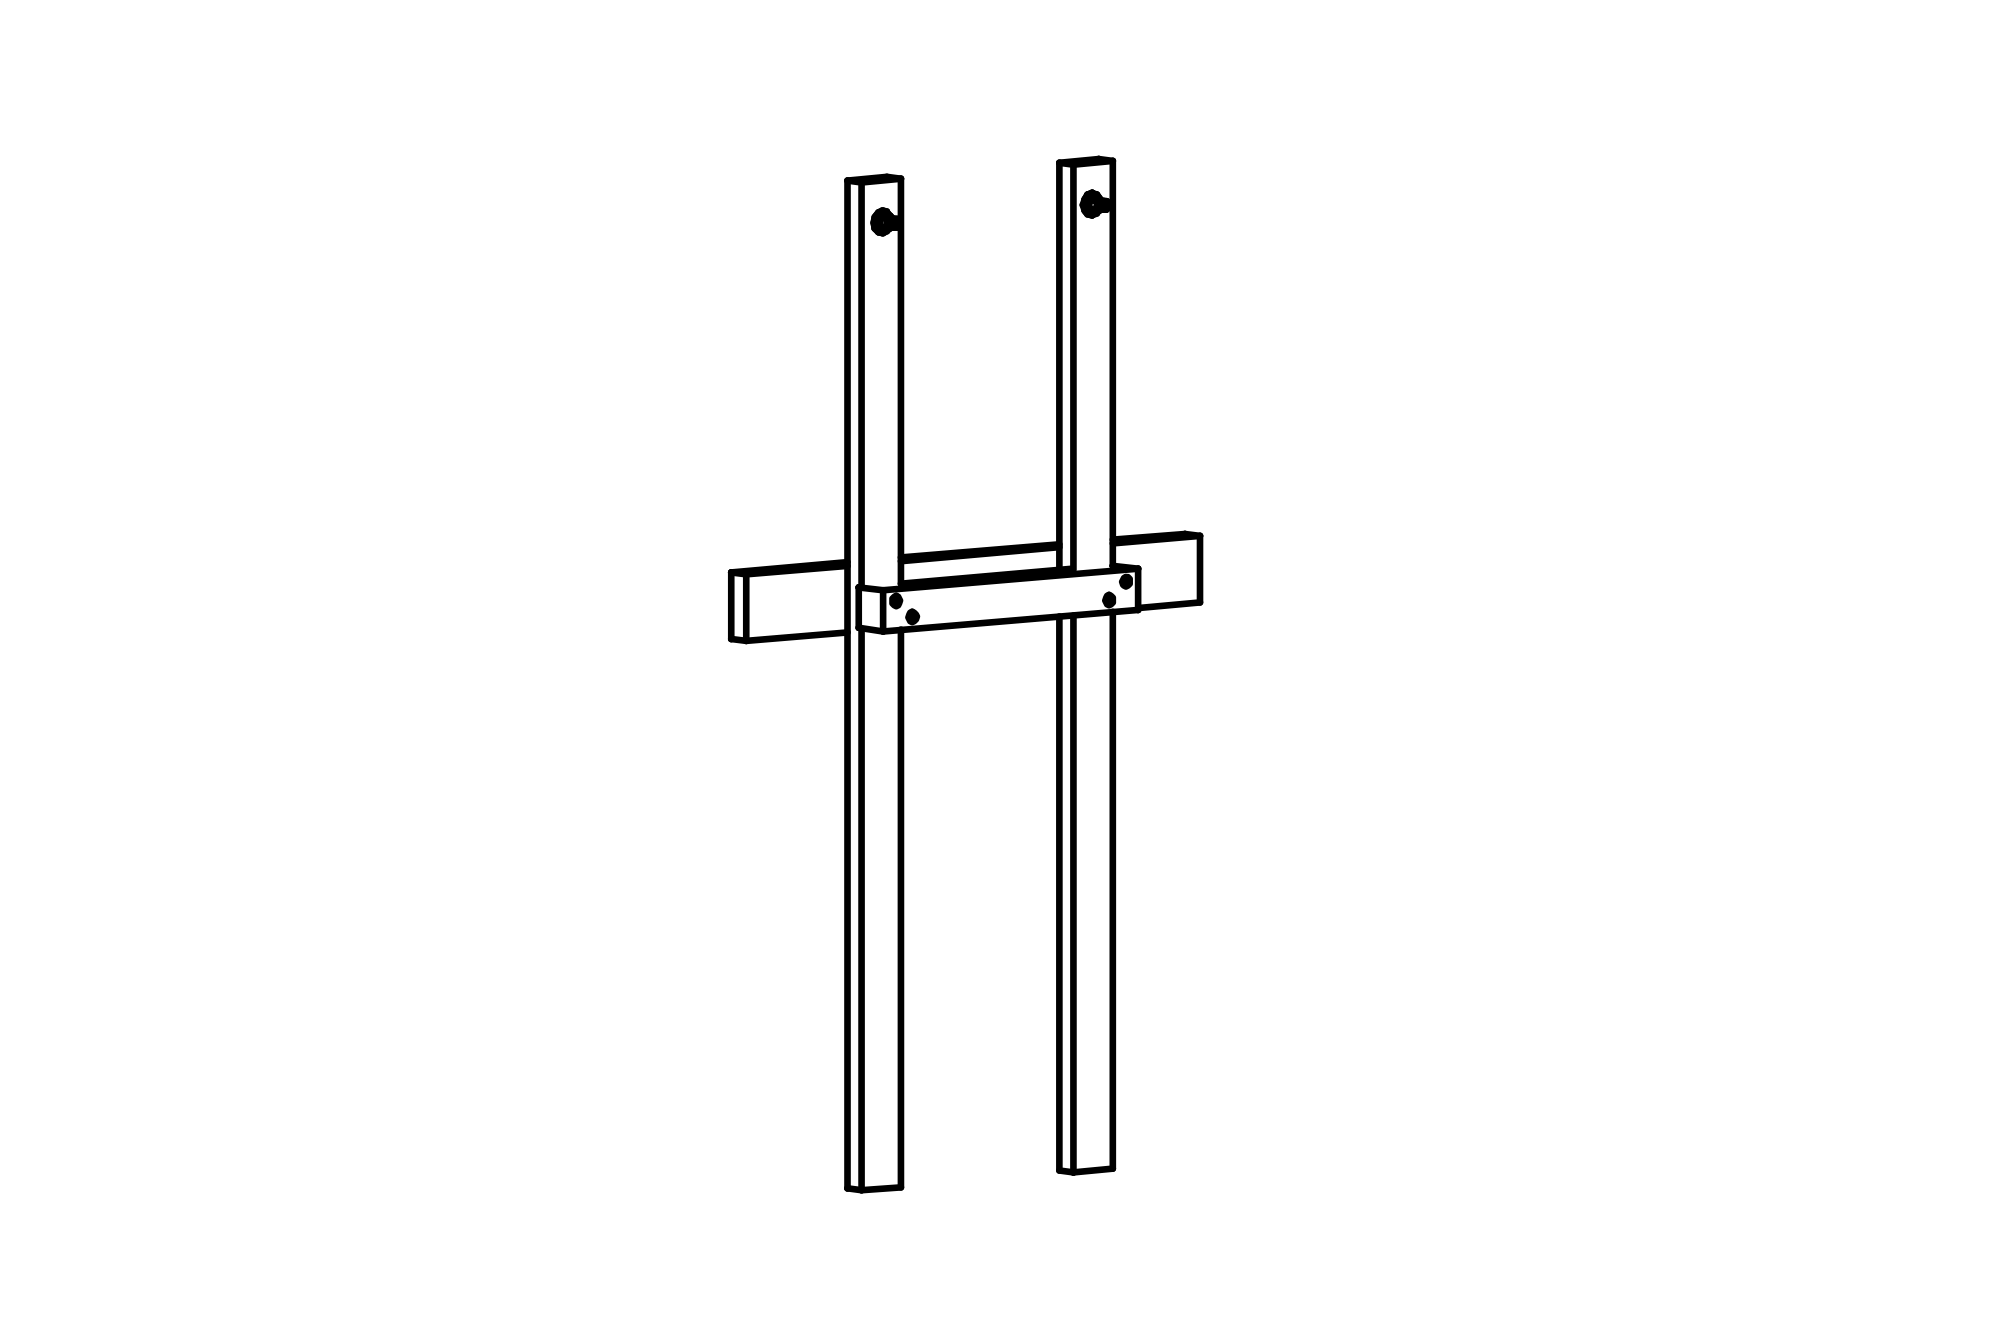 Support Frame for Small Square Tower, height = 1.50 m